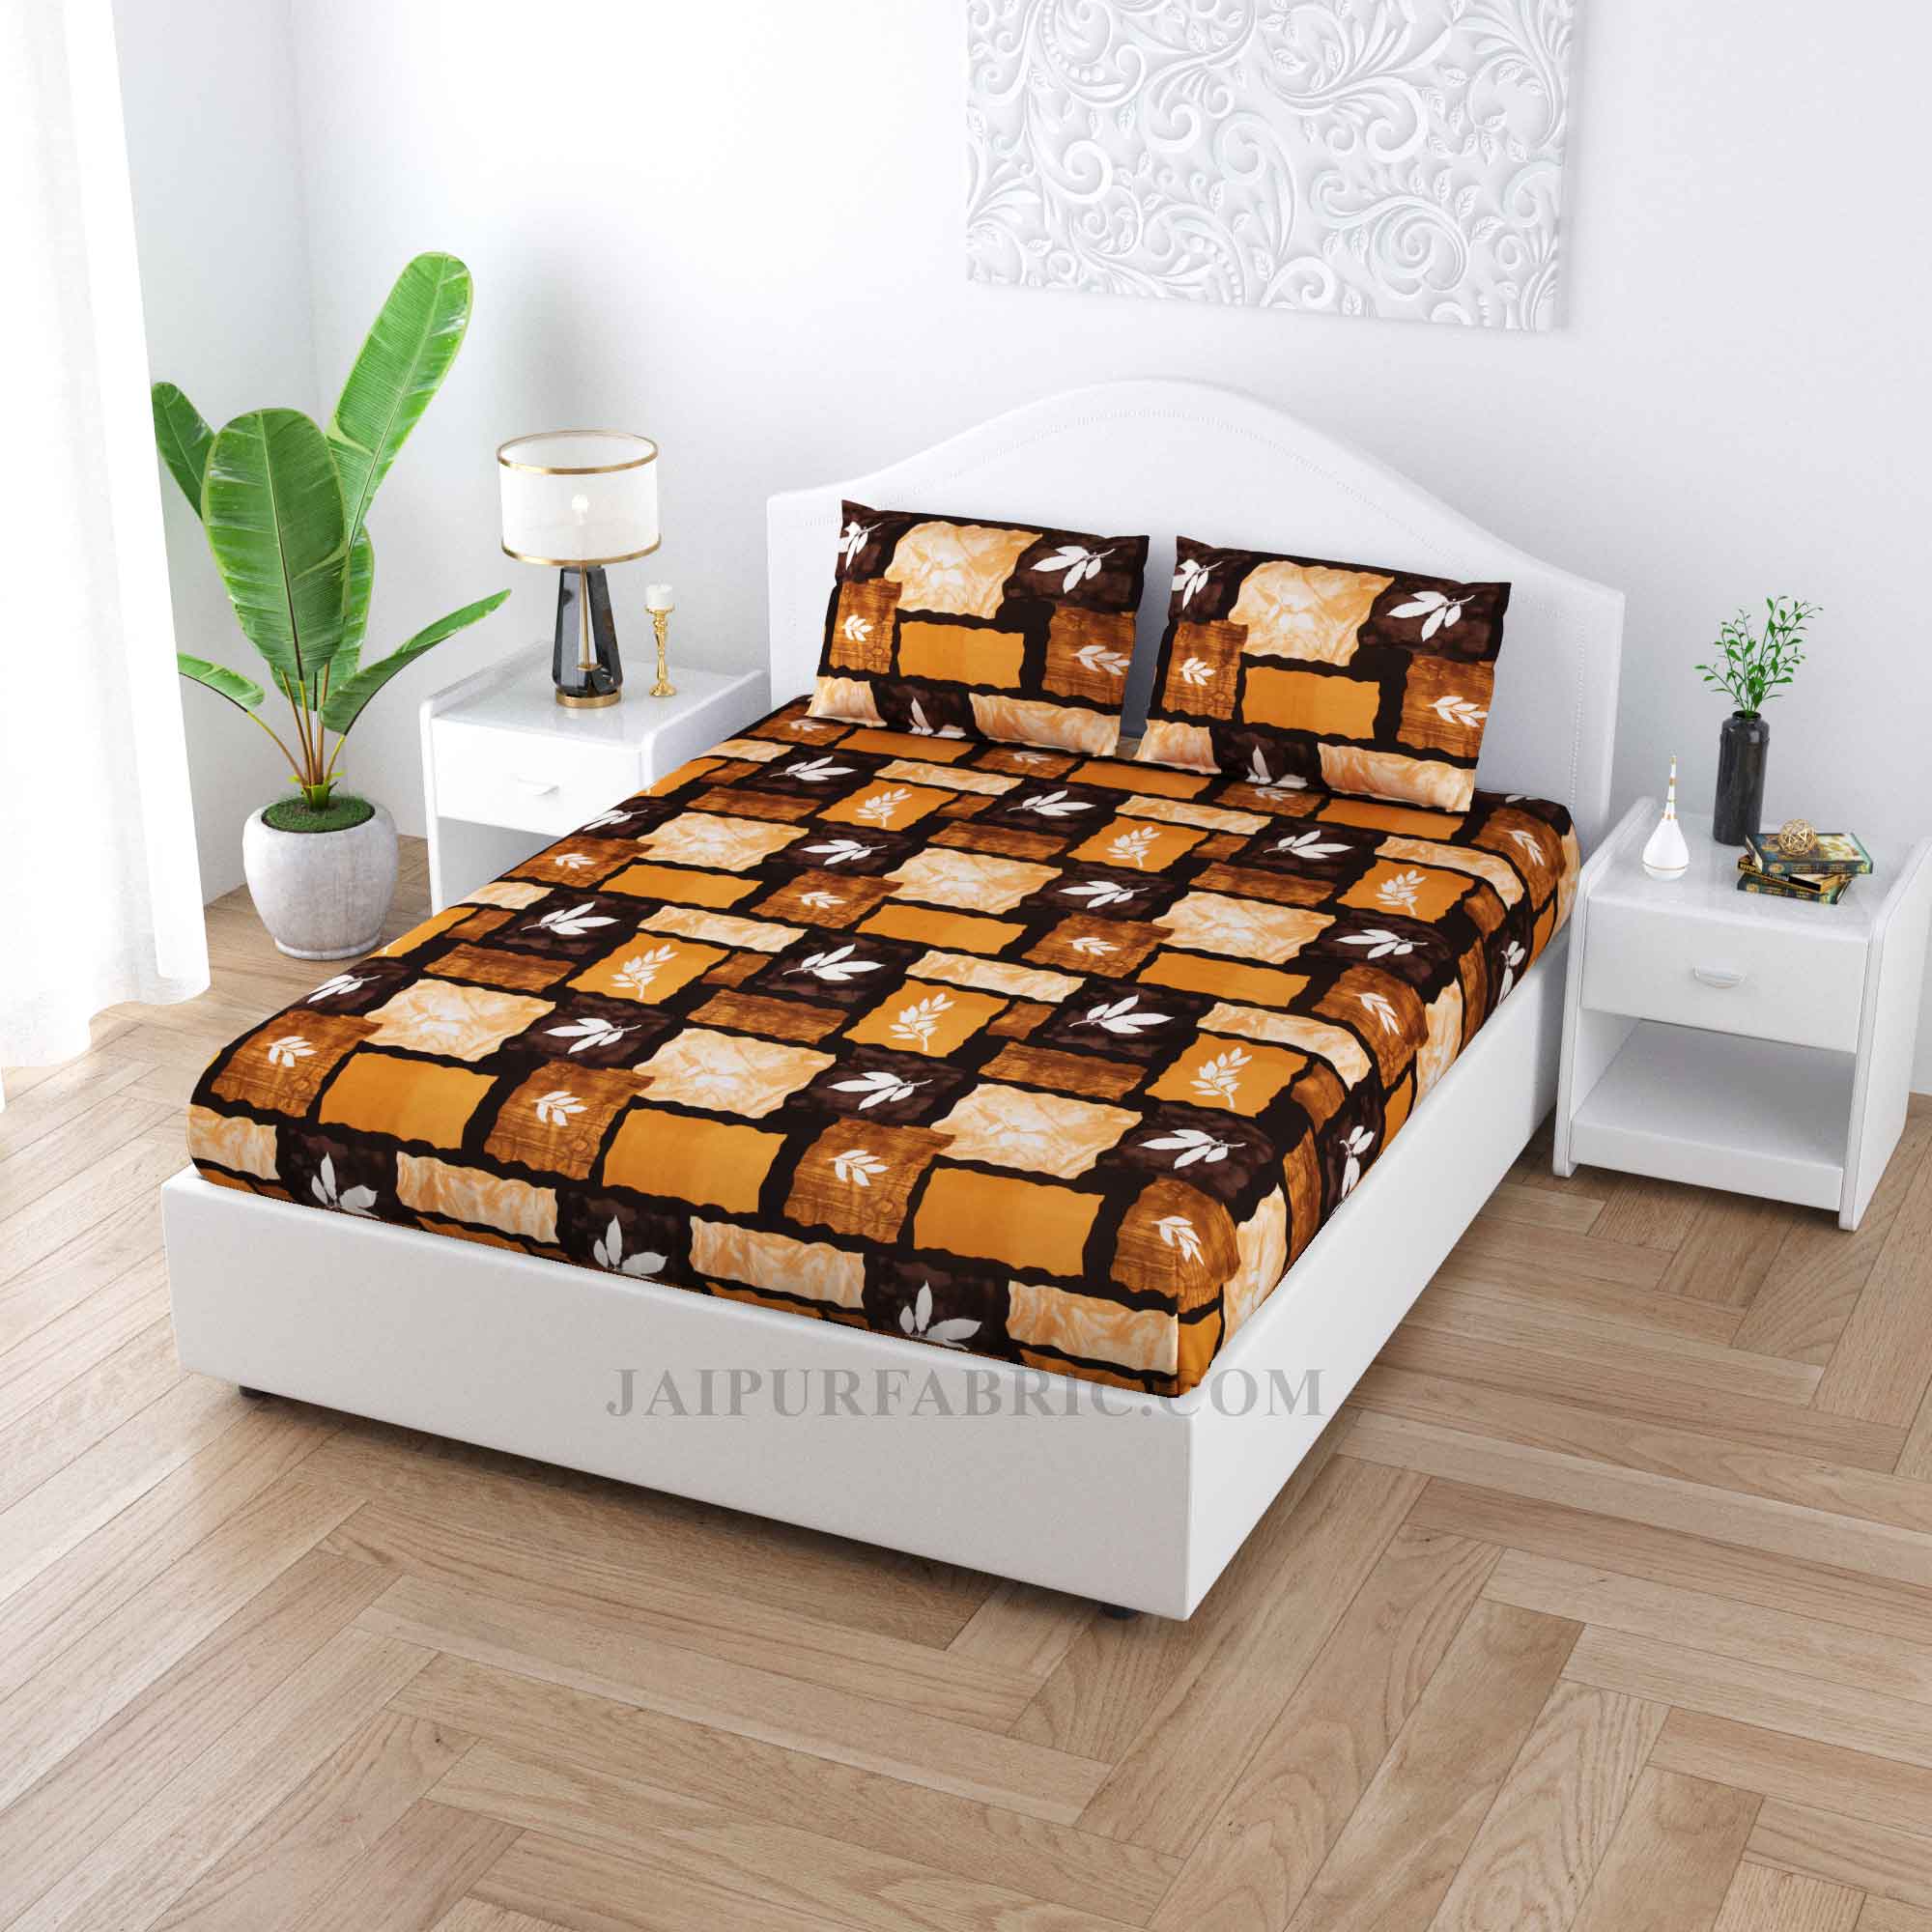 Stone Wall Brown Cotton Double Bedsheet